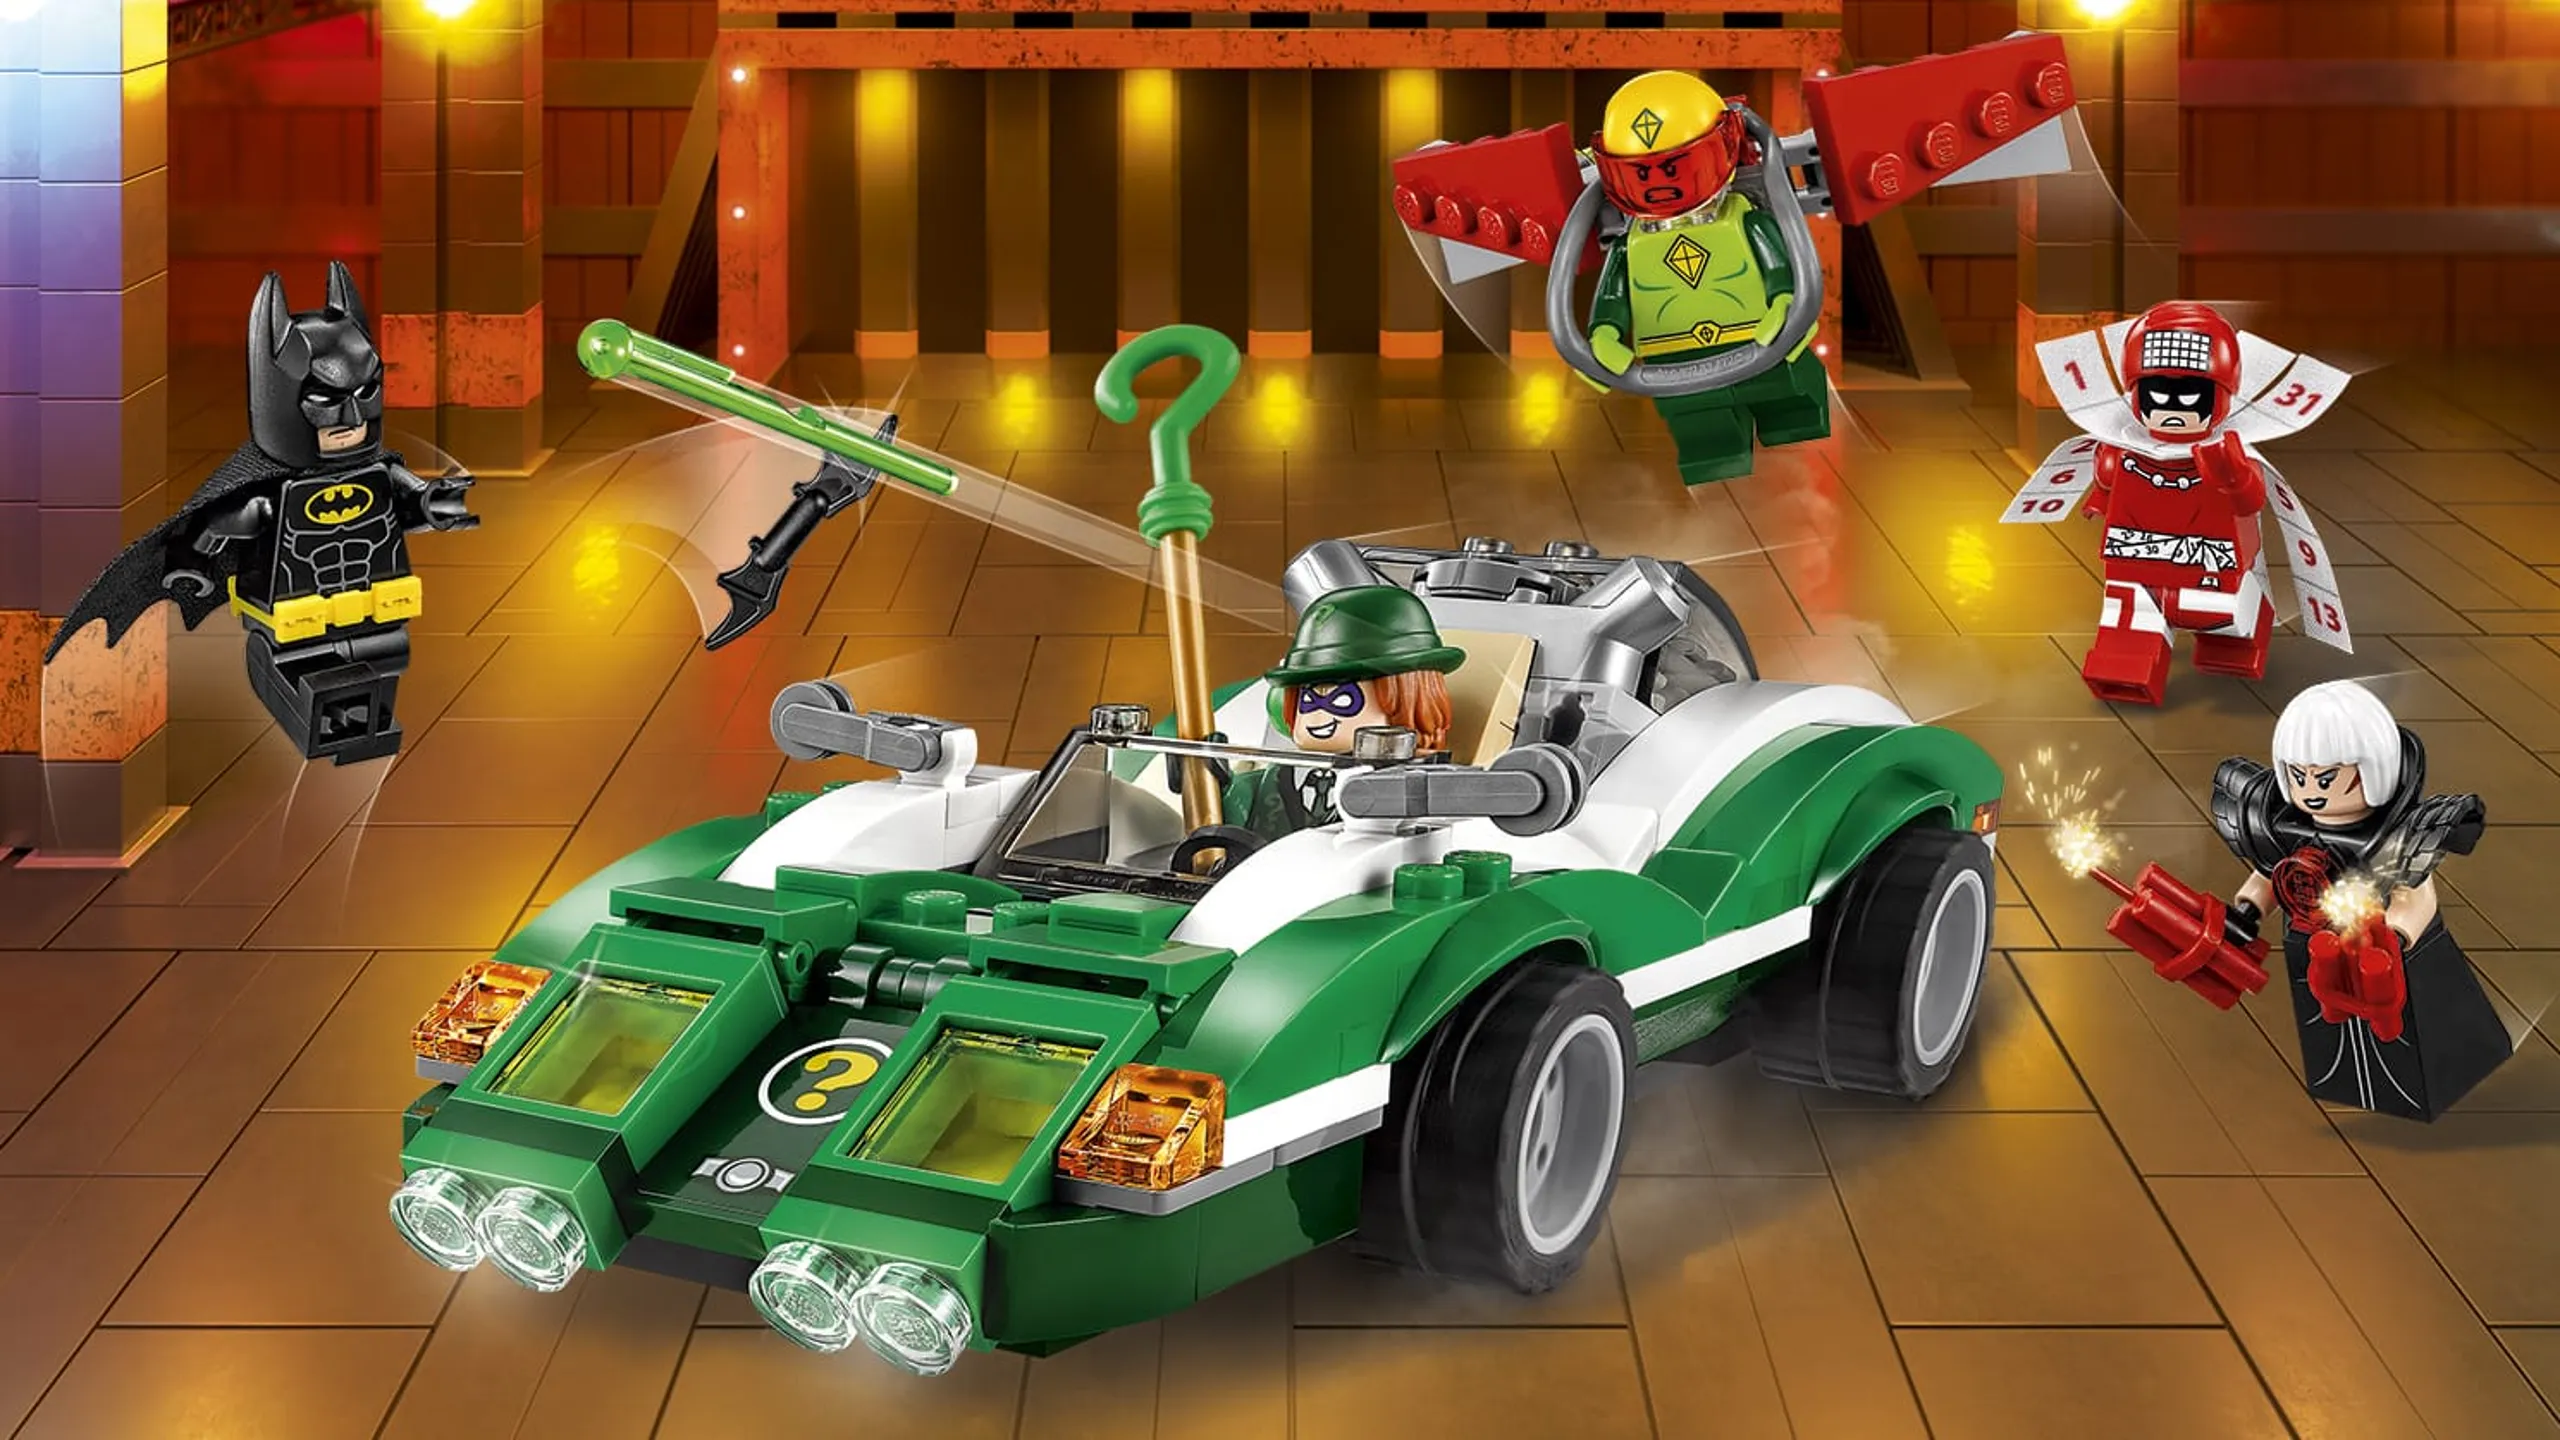 LEGO Batman Movie Riddler Riddle Racer - 70903 - Battle with Batman™ against The Riddler™ and his allies, Magpie, Kite Man and Calendar Man!